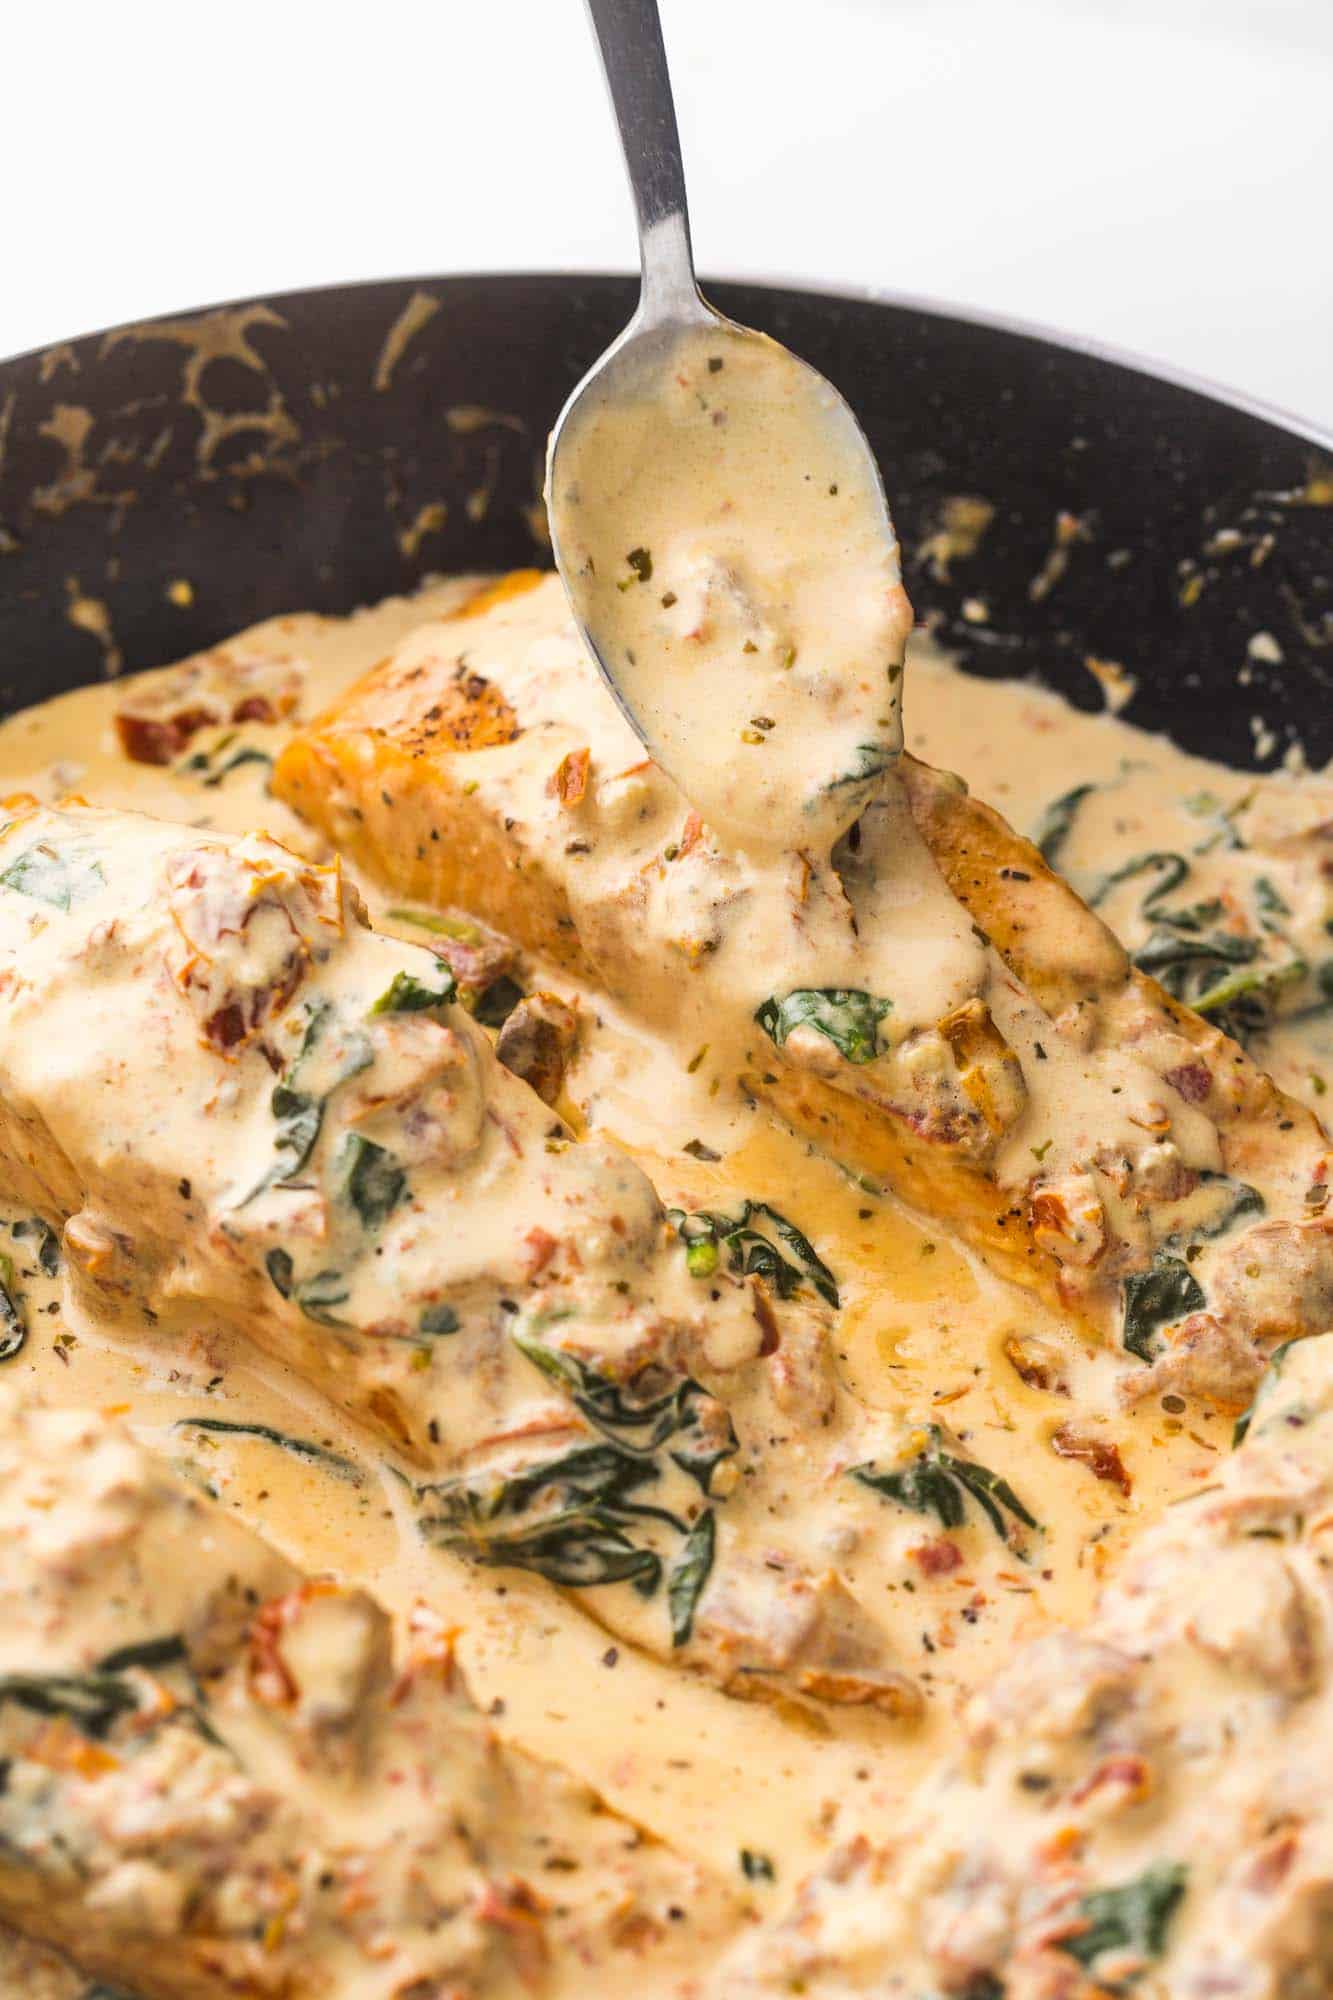 Spooning cream sauce over salmon in the skillet